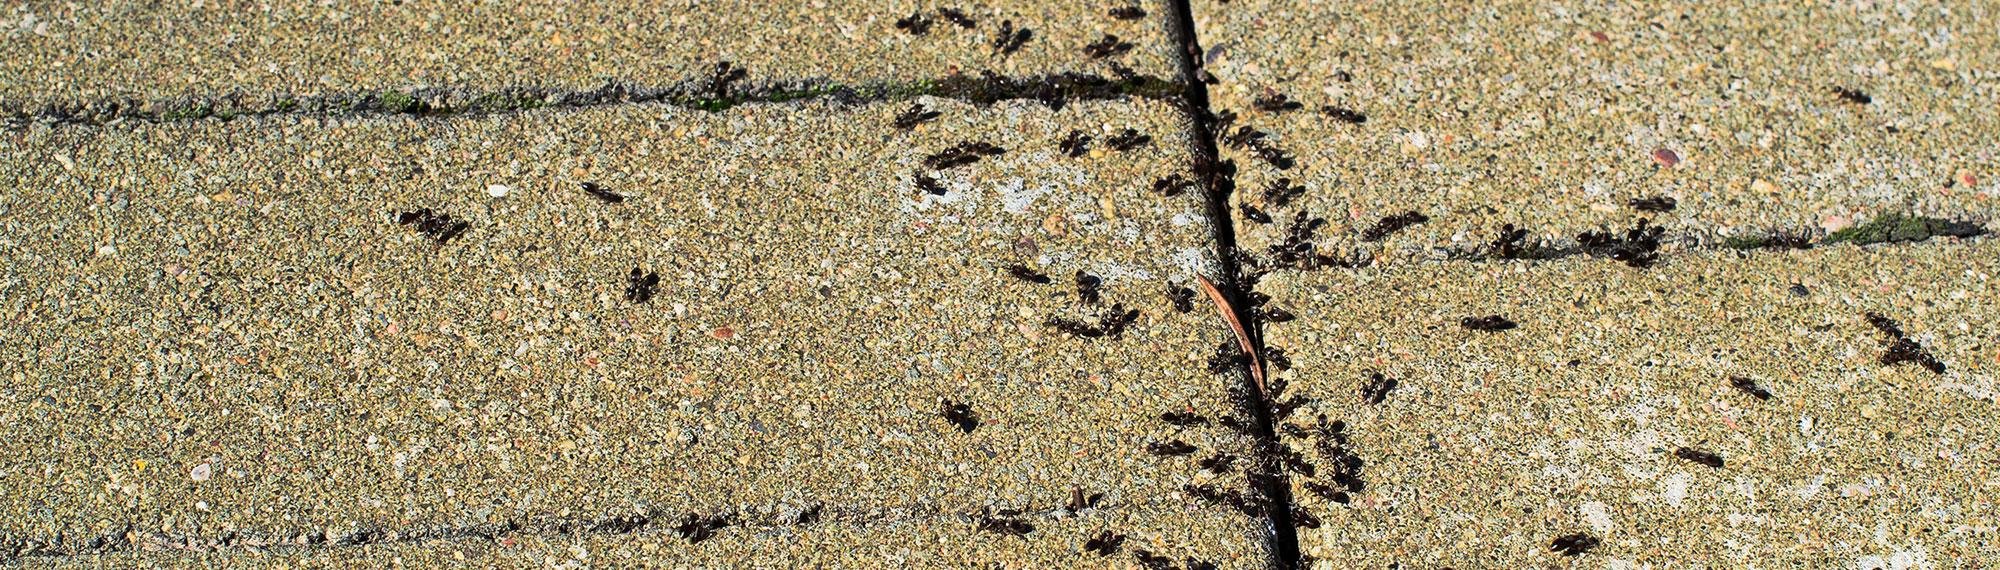 pavement ants in crack in driveway